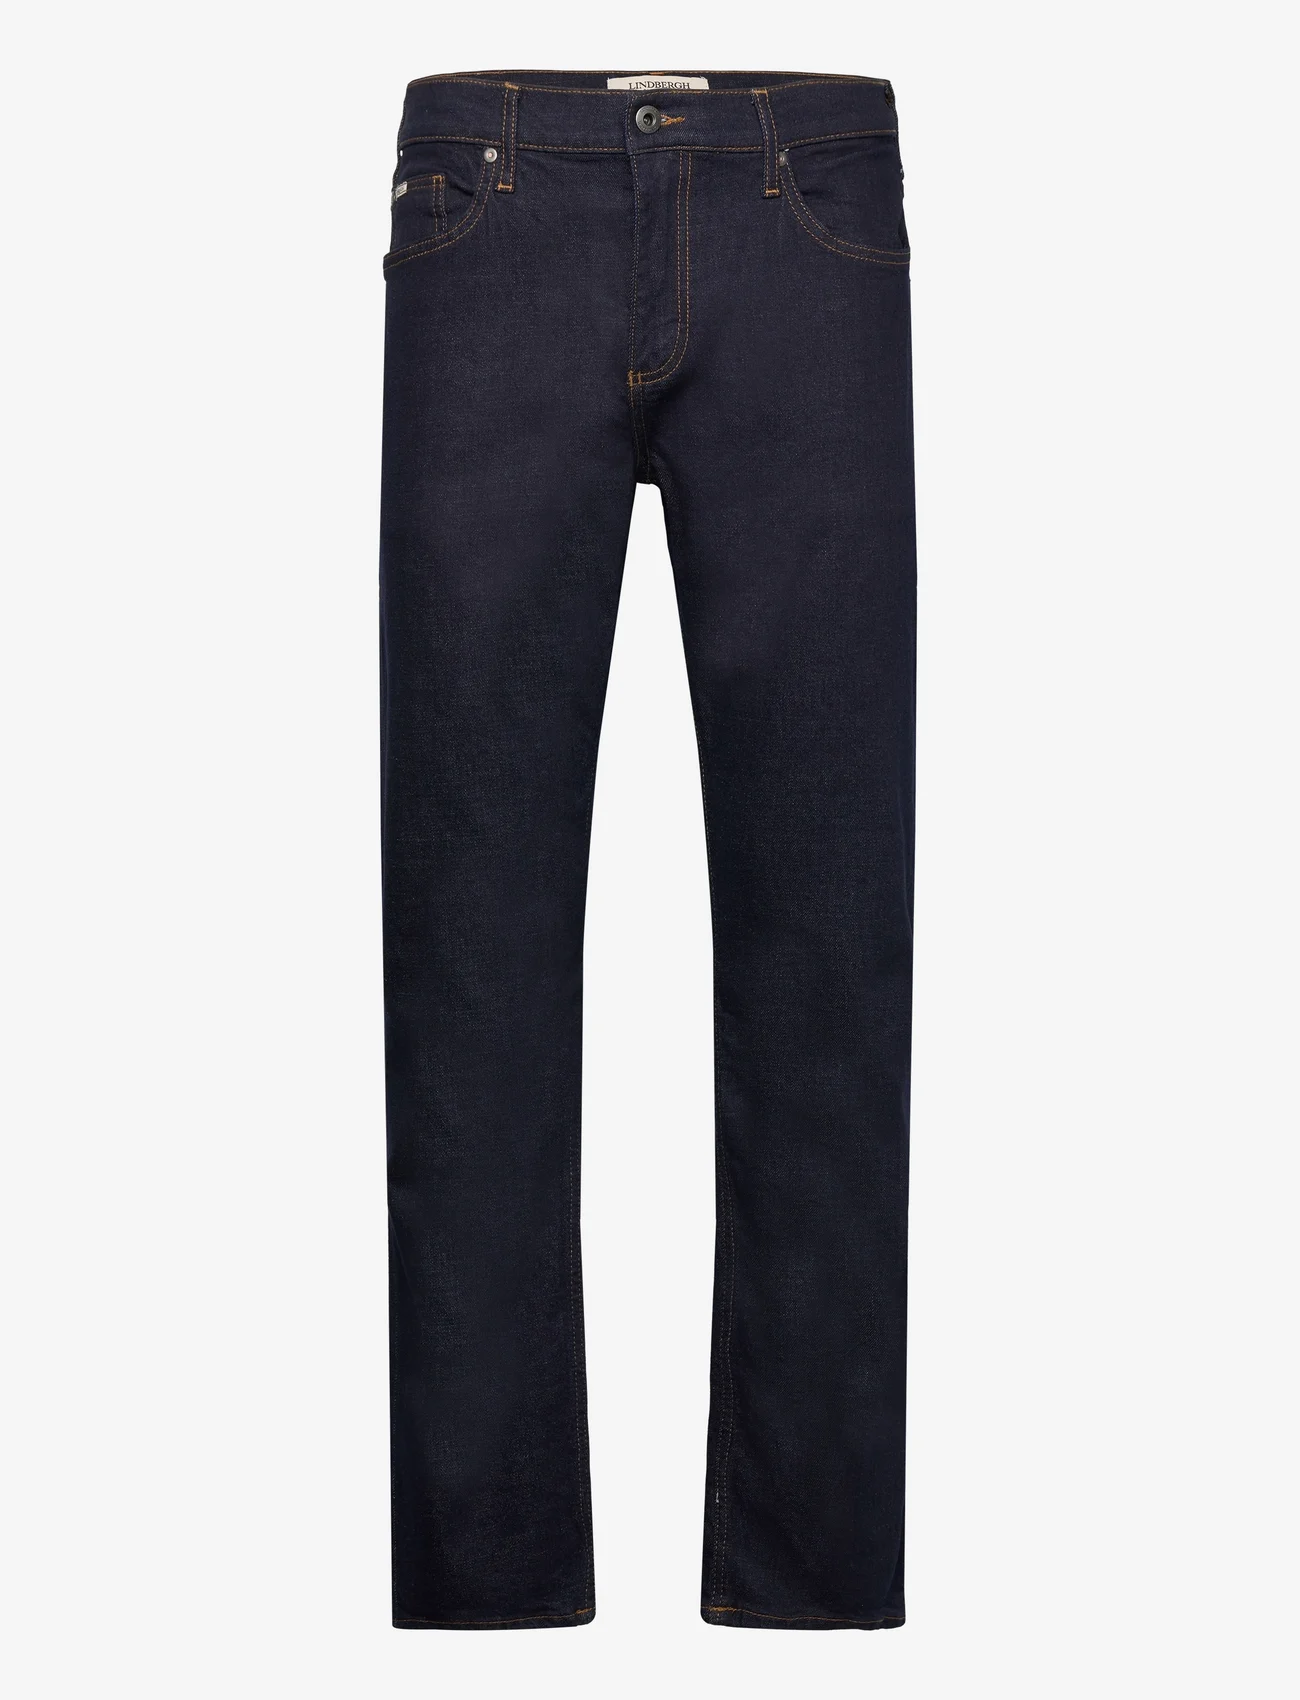 Lindbergh - Loose fit jeans jeans - loose jeans - raw indigo - 0